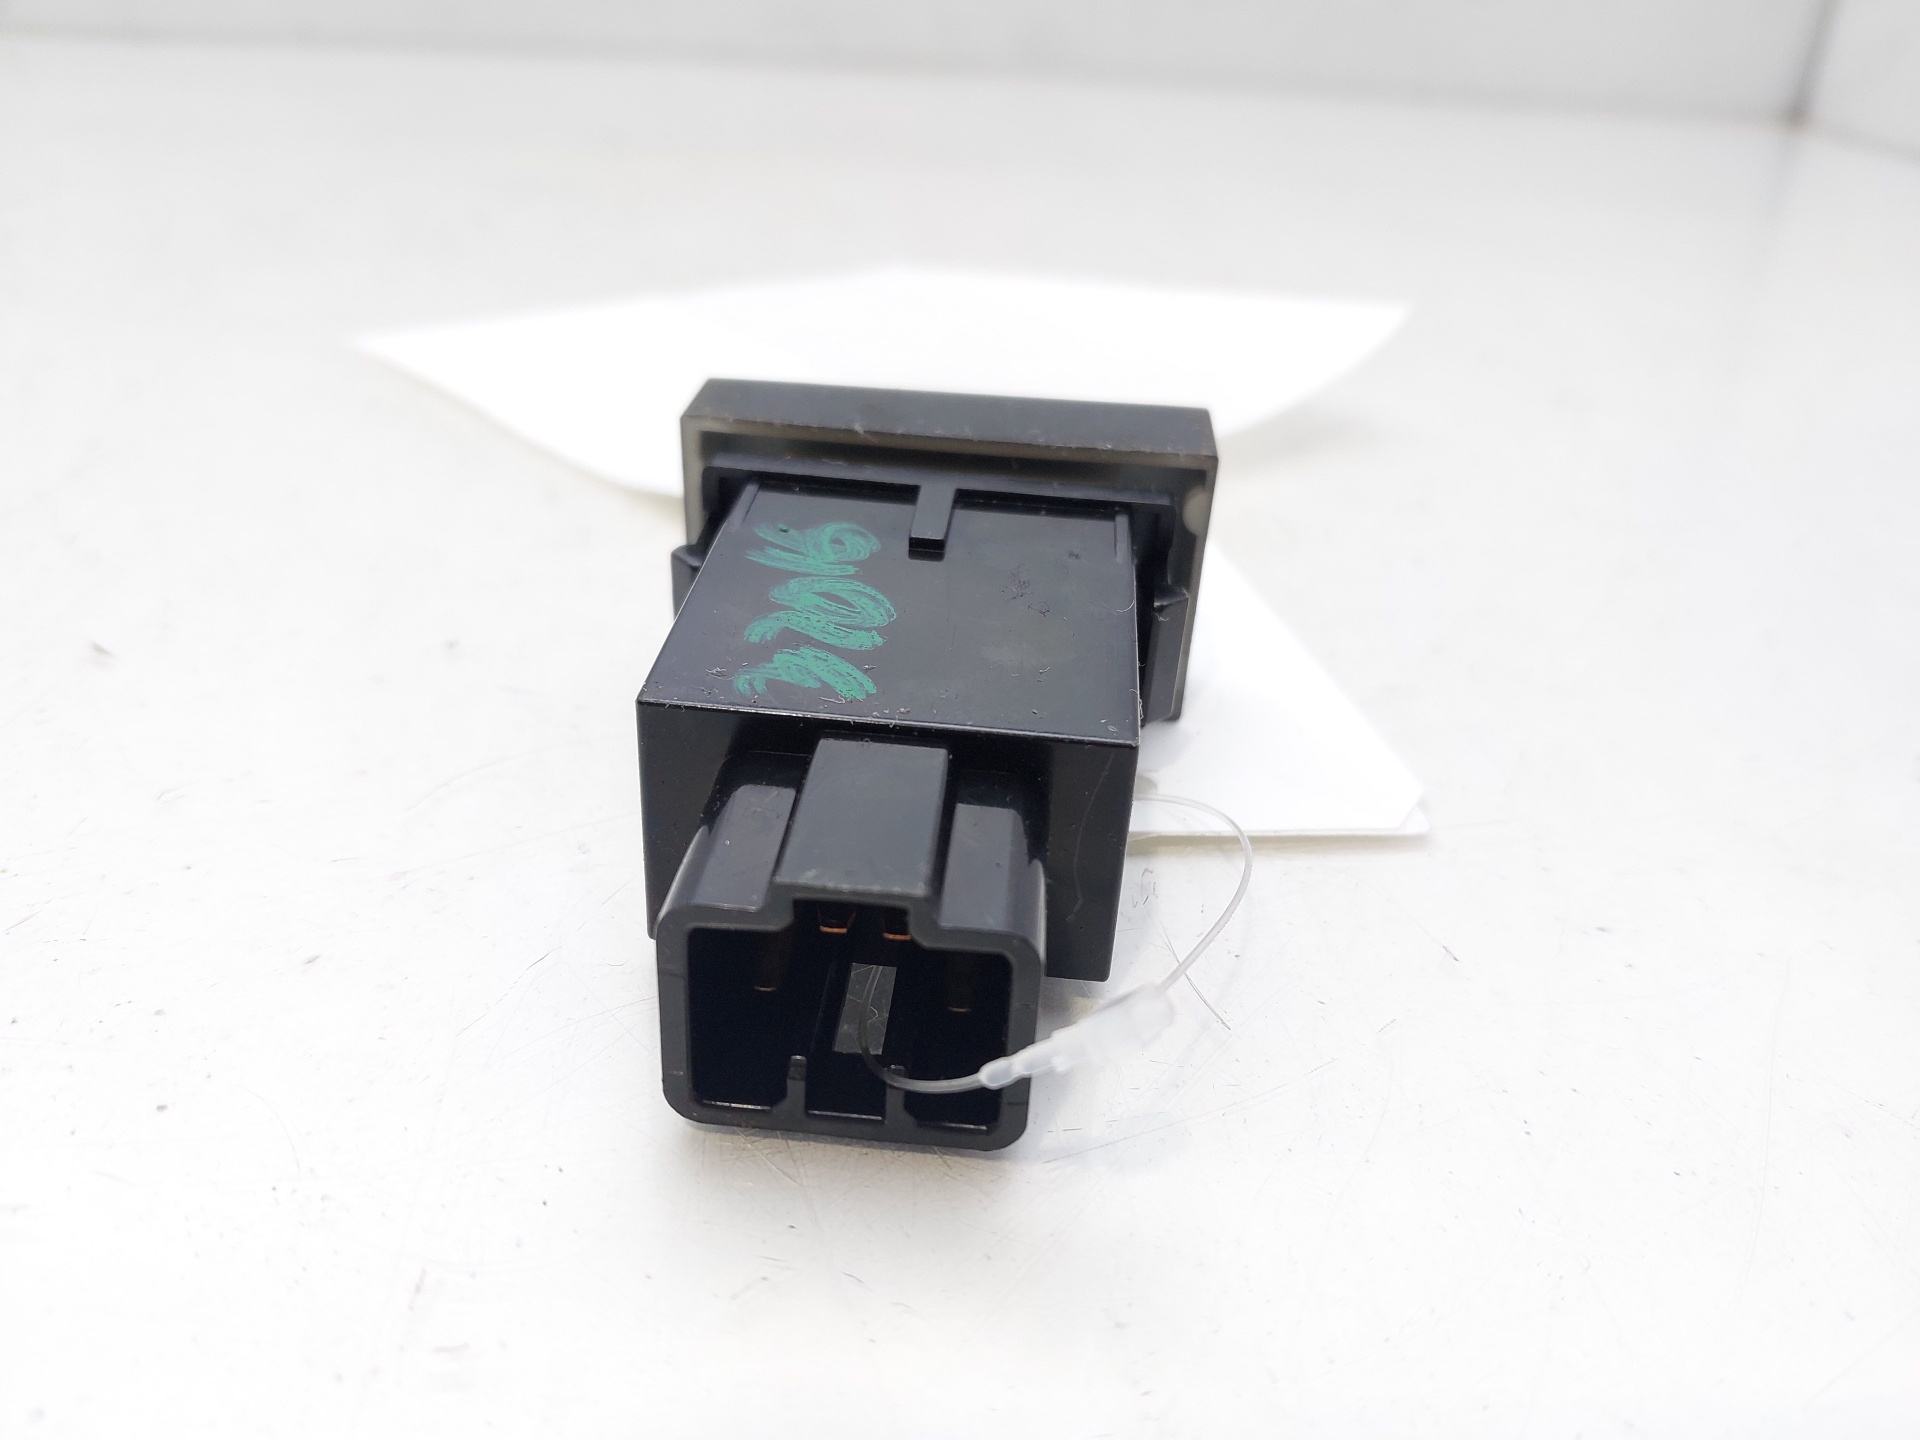 SSANGYONG Rexton Y200 (2001-2007)  Fog light switch 864W02500 23056372